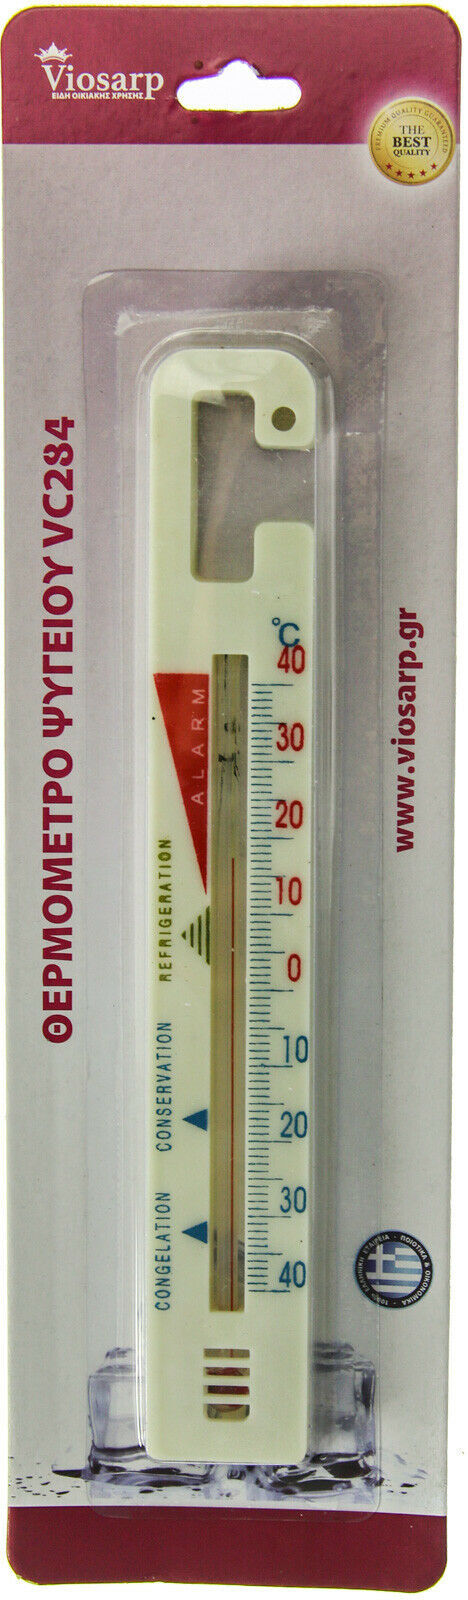 Fridge thermometer and Freezer thermometer with temperature scale indicator - $11.09